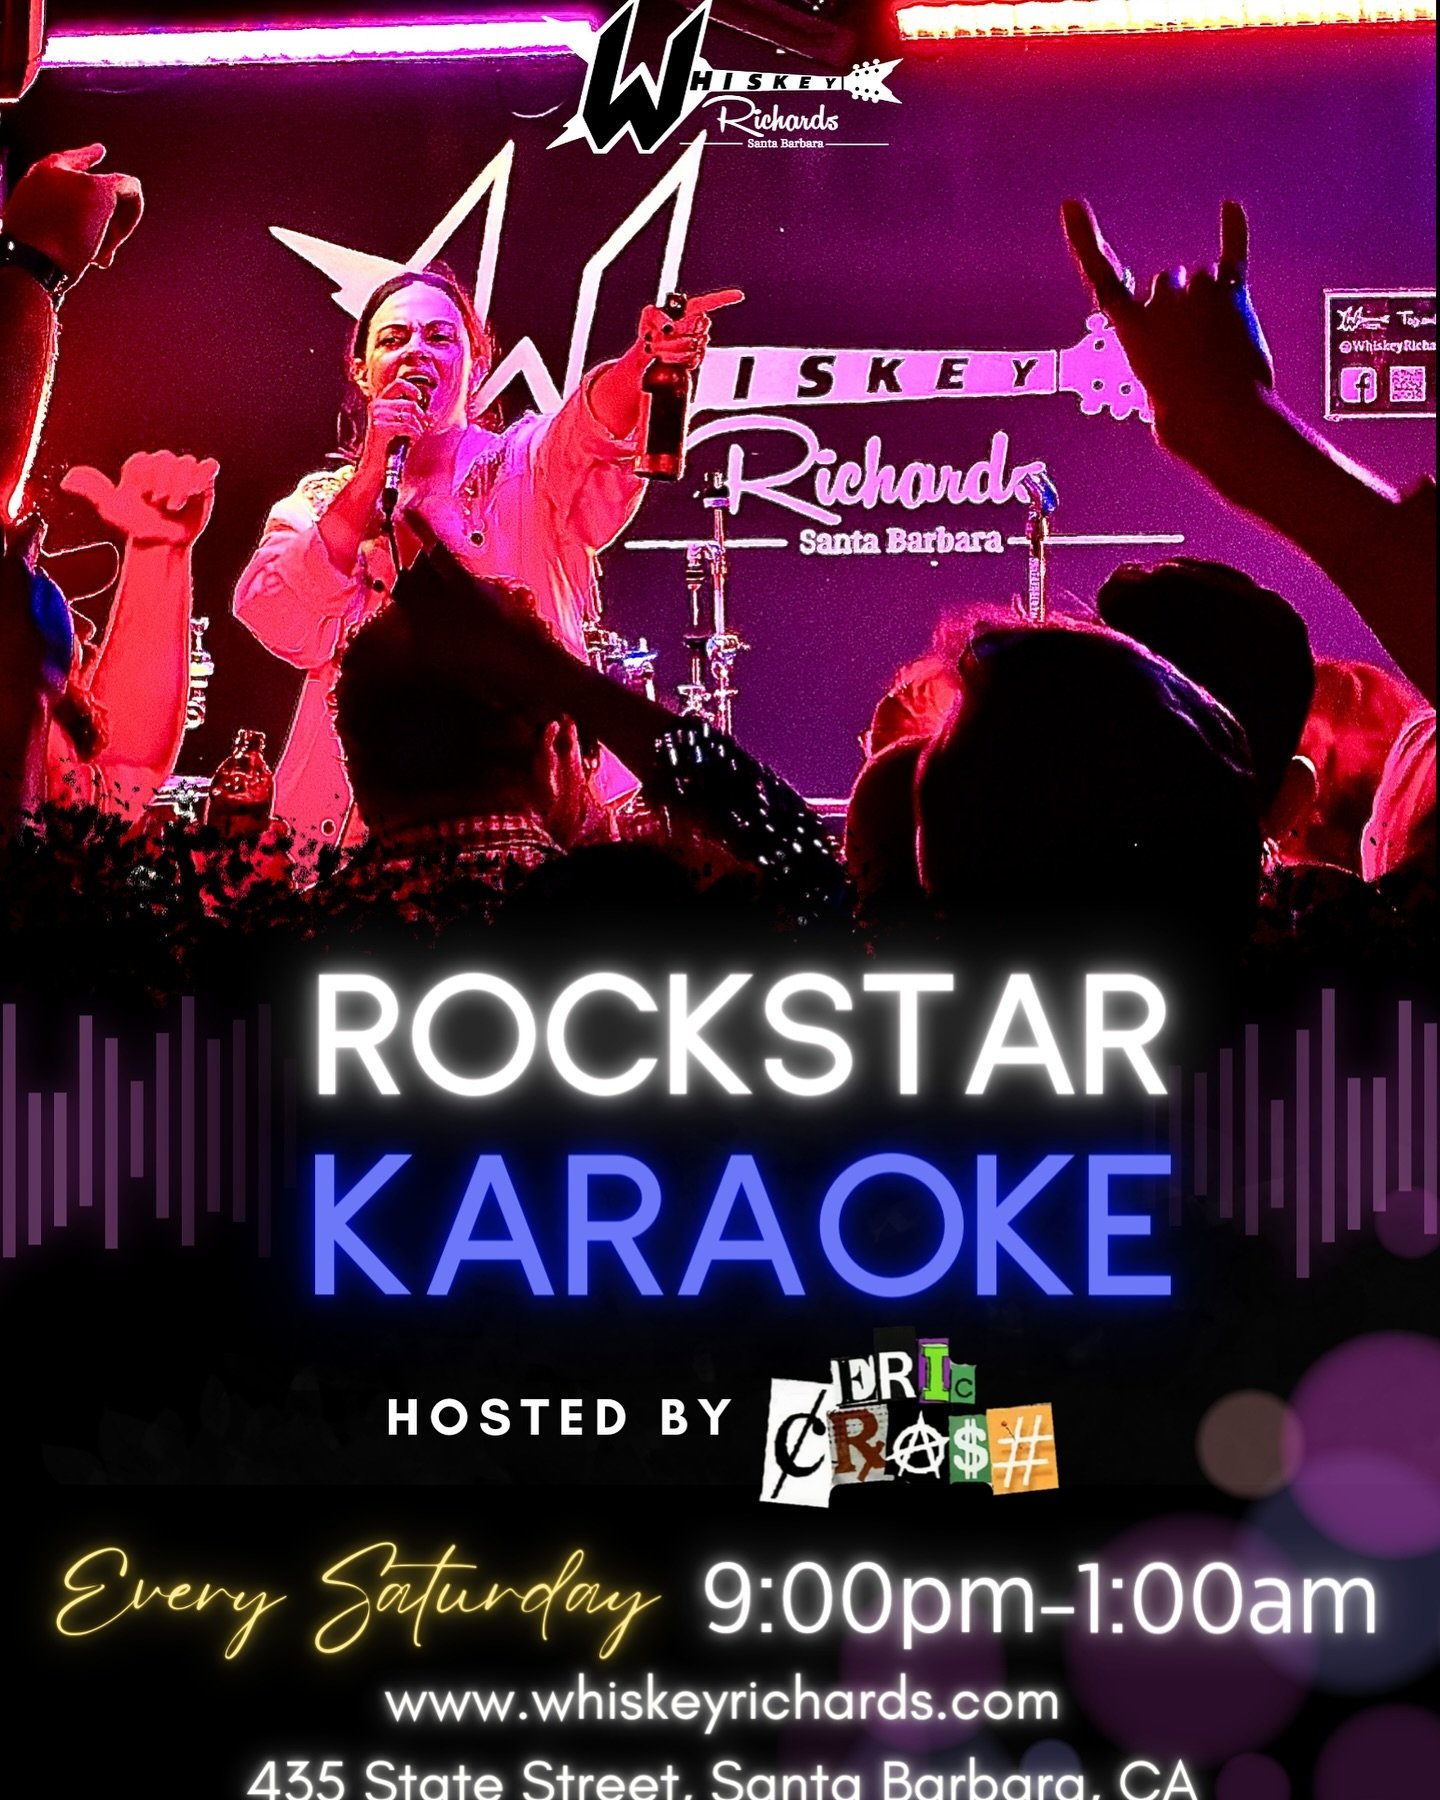 Mic check, one, two! It&rsquo;s karaoke night at Whiskey Richards, and the stage is yours. Come showcase your talent and have a blast with us! #RockstarKaraoke #DowntownSB #MagicMoments #SantaBarbara #WhiskeyRichards